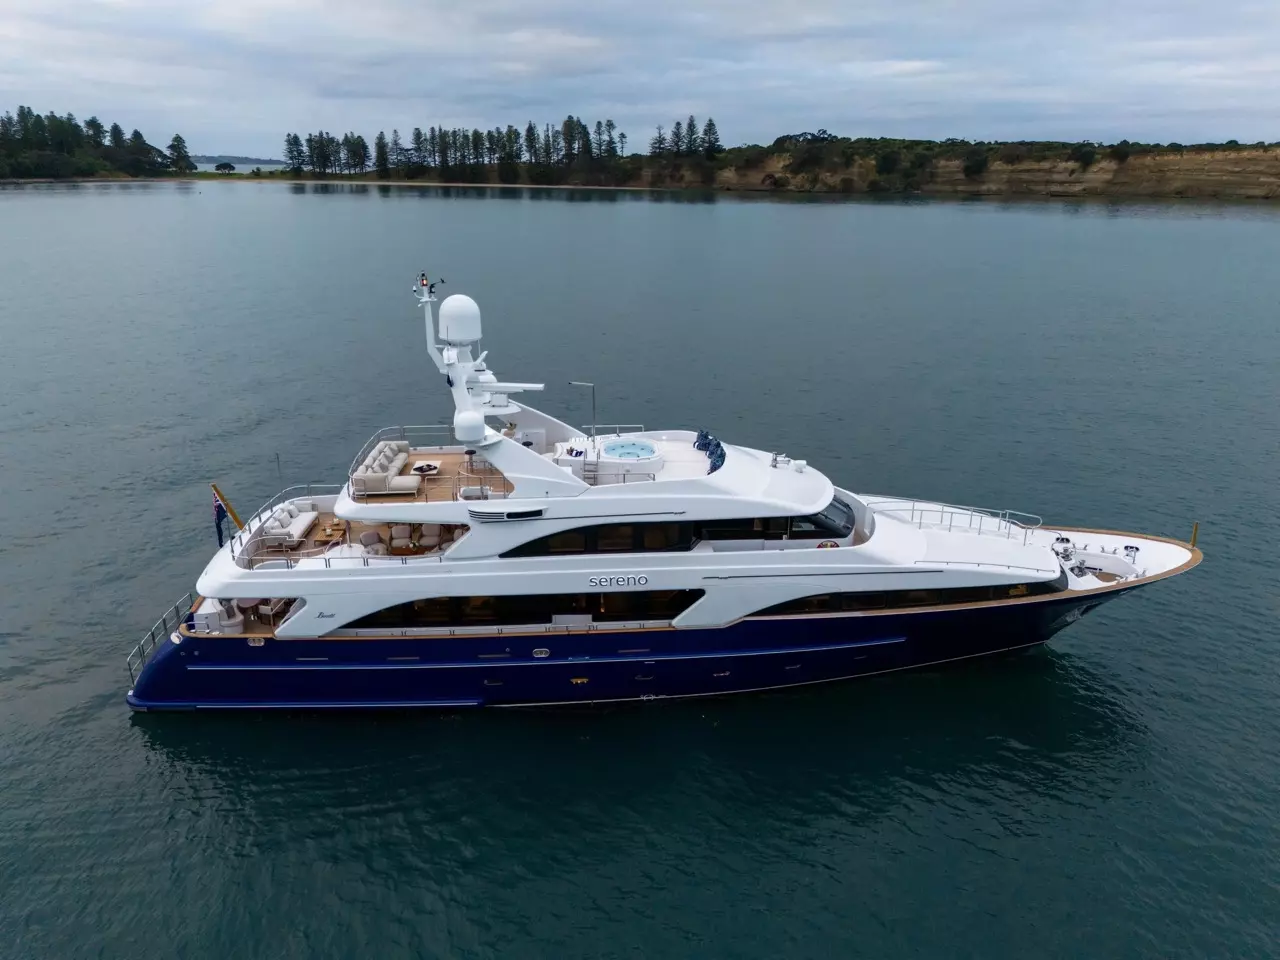 Sereno by Benetti - Top rates for a Charter of a private Superyacht in Fiji